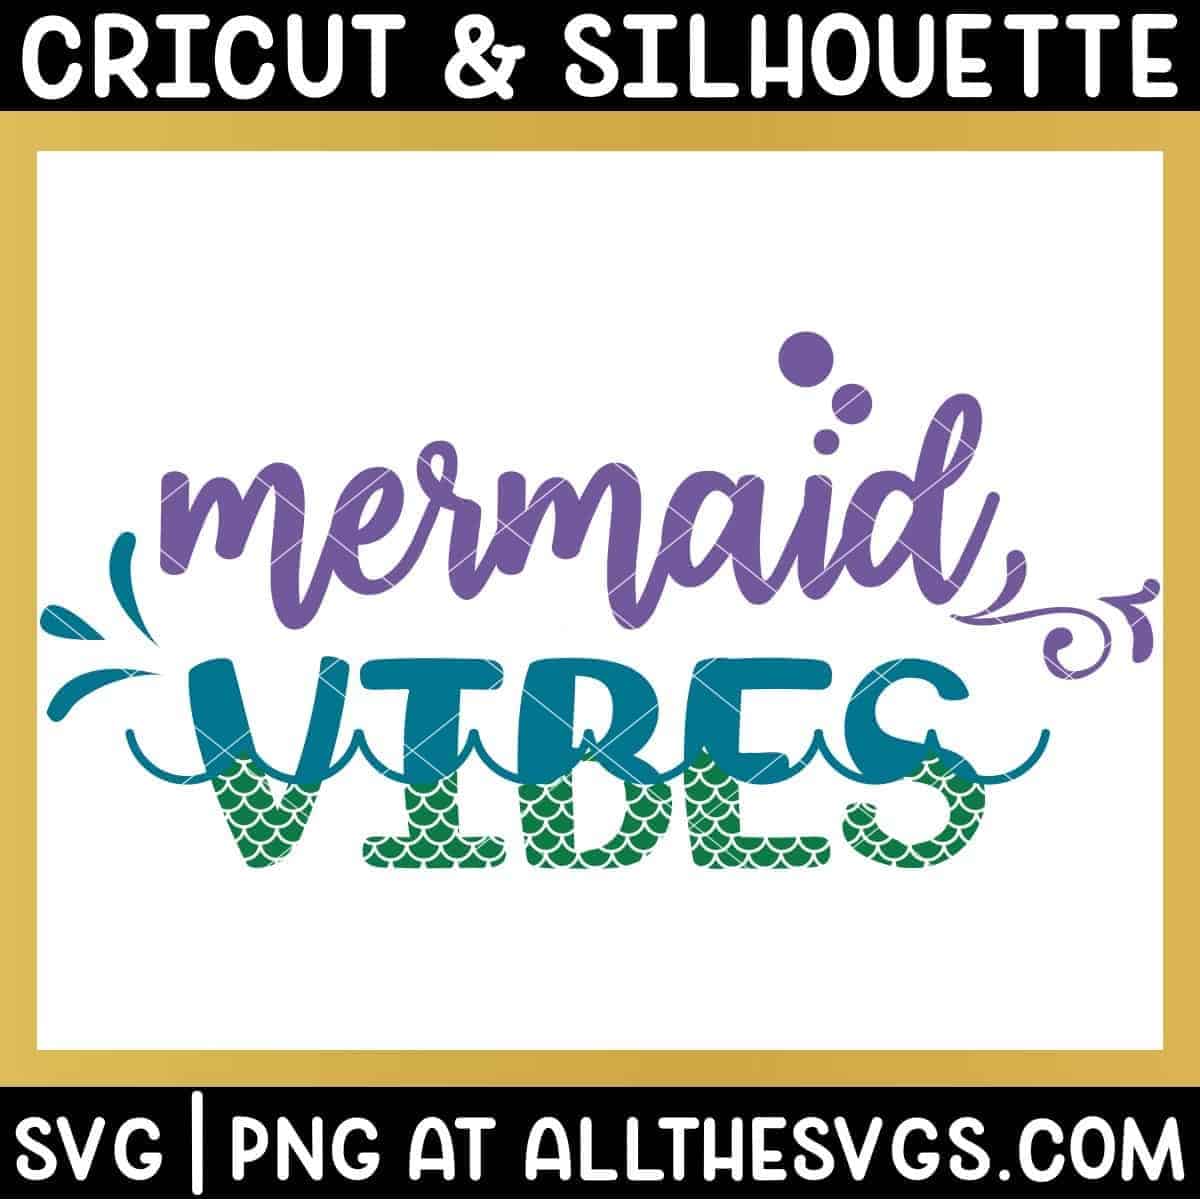 free mermaid vibes svg png written in bubbles, waves, and fish scales.